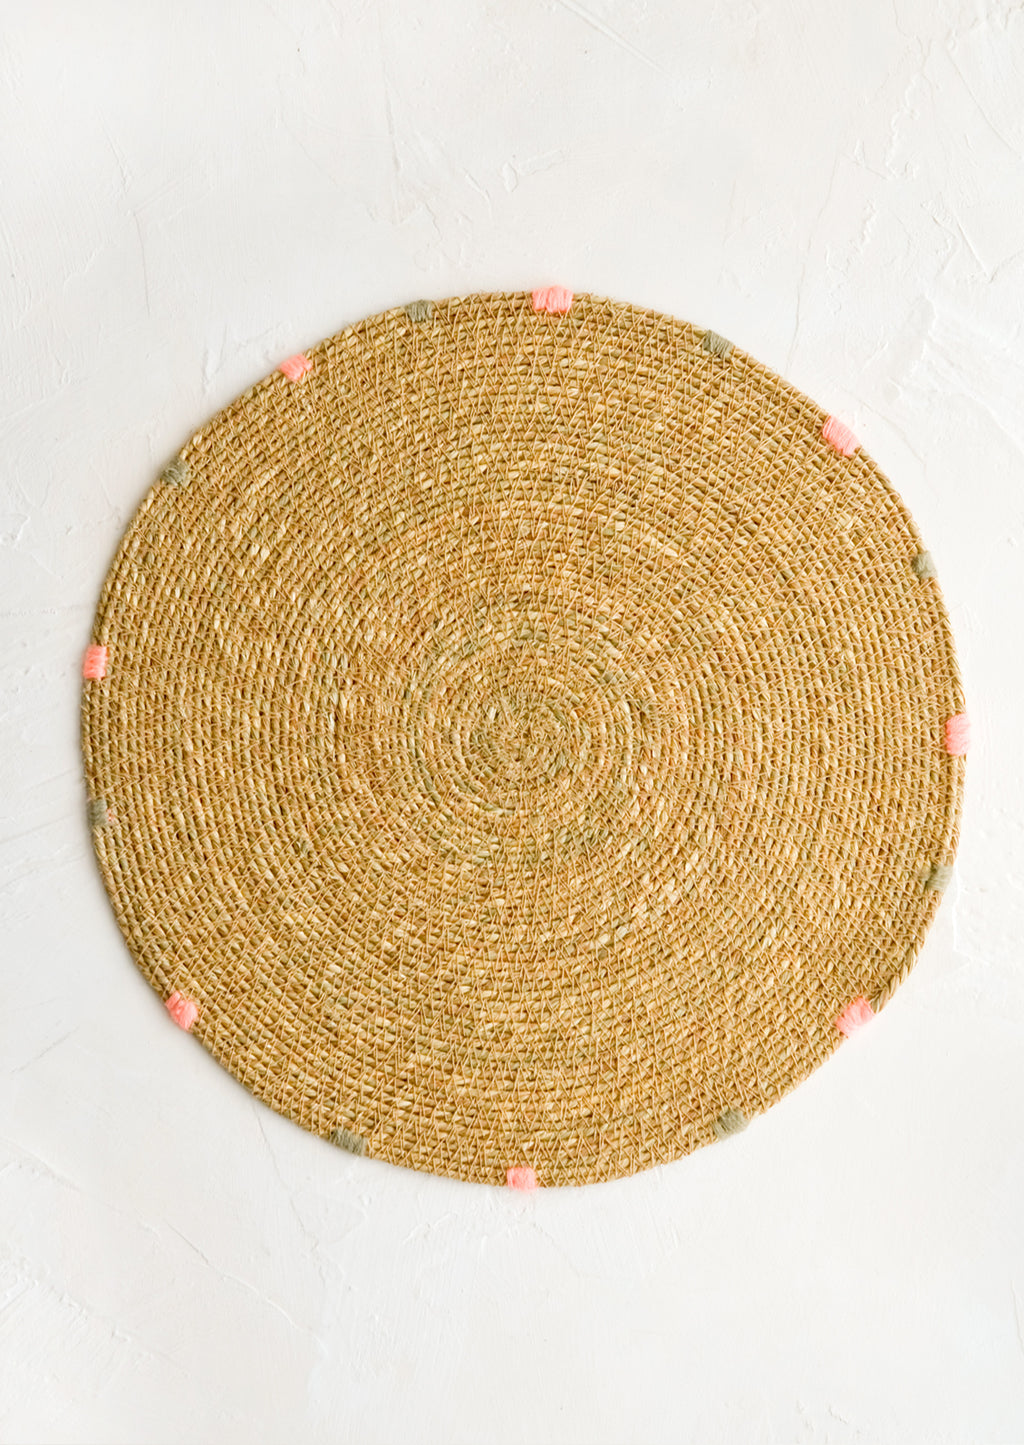 Tan: A round seagrass placemat in natural with grey and pink dashes embroidered around rim.